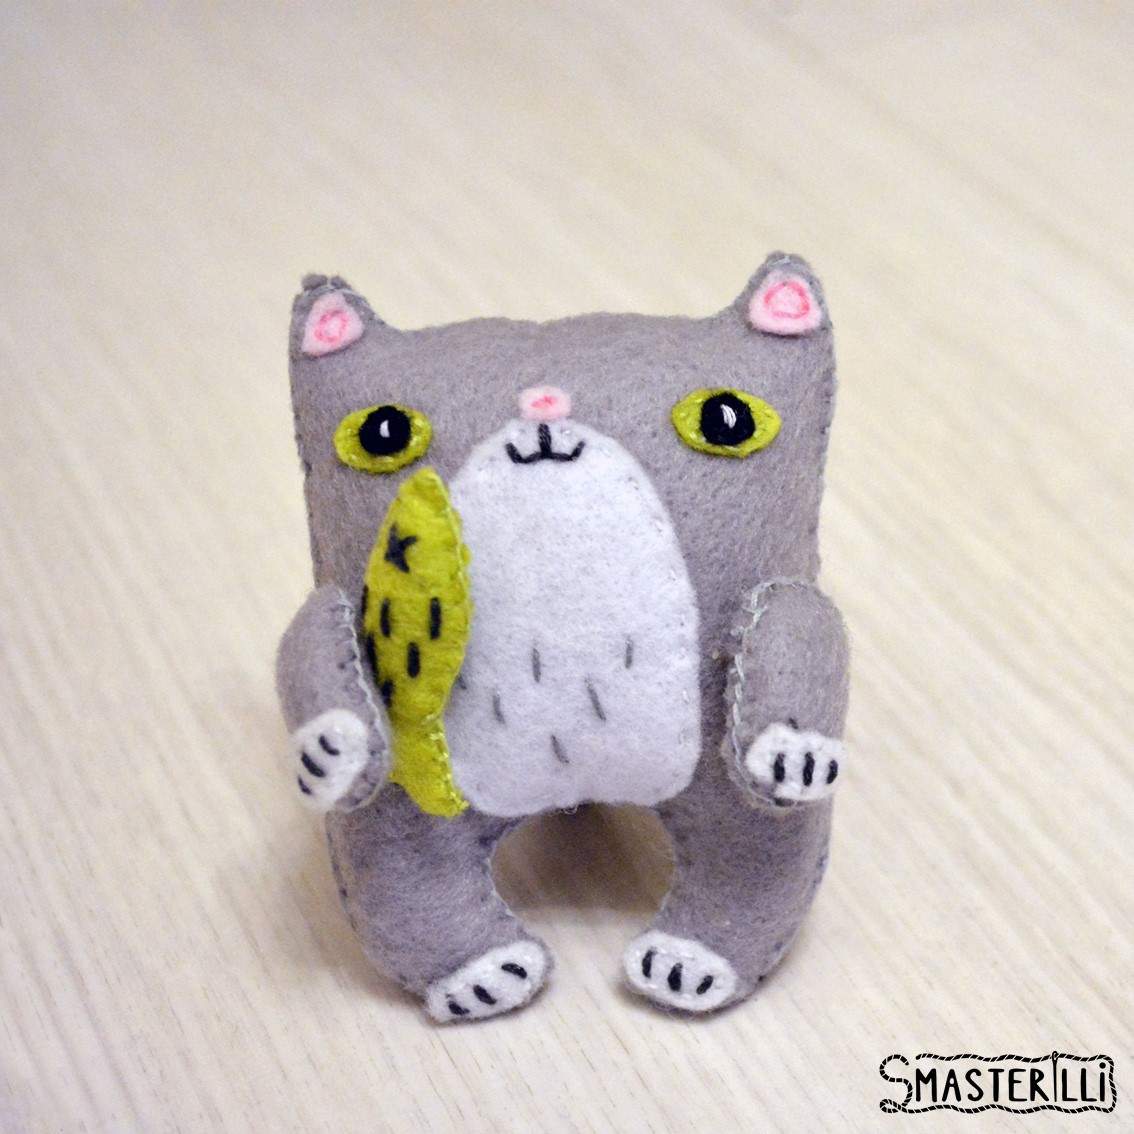 Make your own felt baby cat with this easy-to-follow tutorial & pattern PDF! It includes photos and instructions to create an awesome felt kawaii ornament.